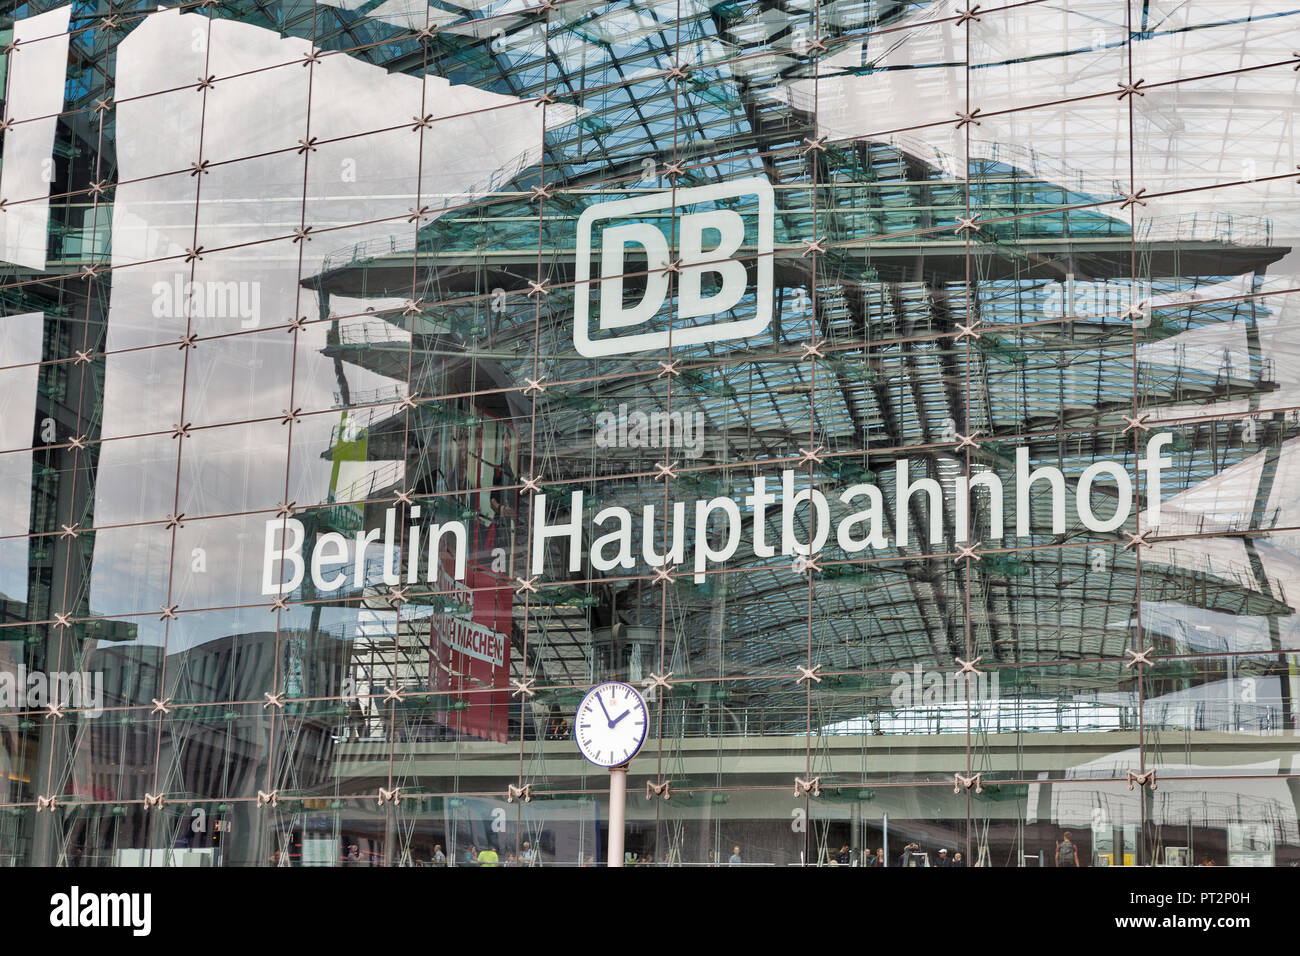 BERLIN, GERMANY - JULY 13, 2018: Facade view of Berlin Central Railway Station square or Berlin Hauptbahnhof, Hbf logo. Station was opened in May 2006 Stock Photo